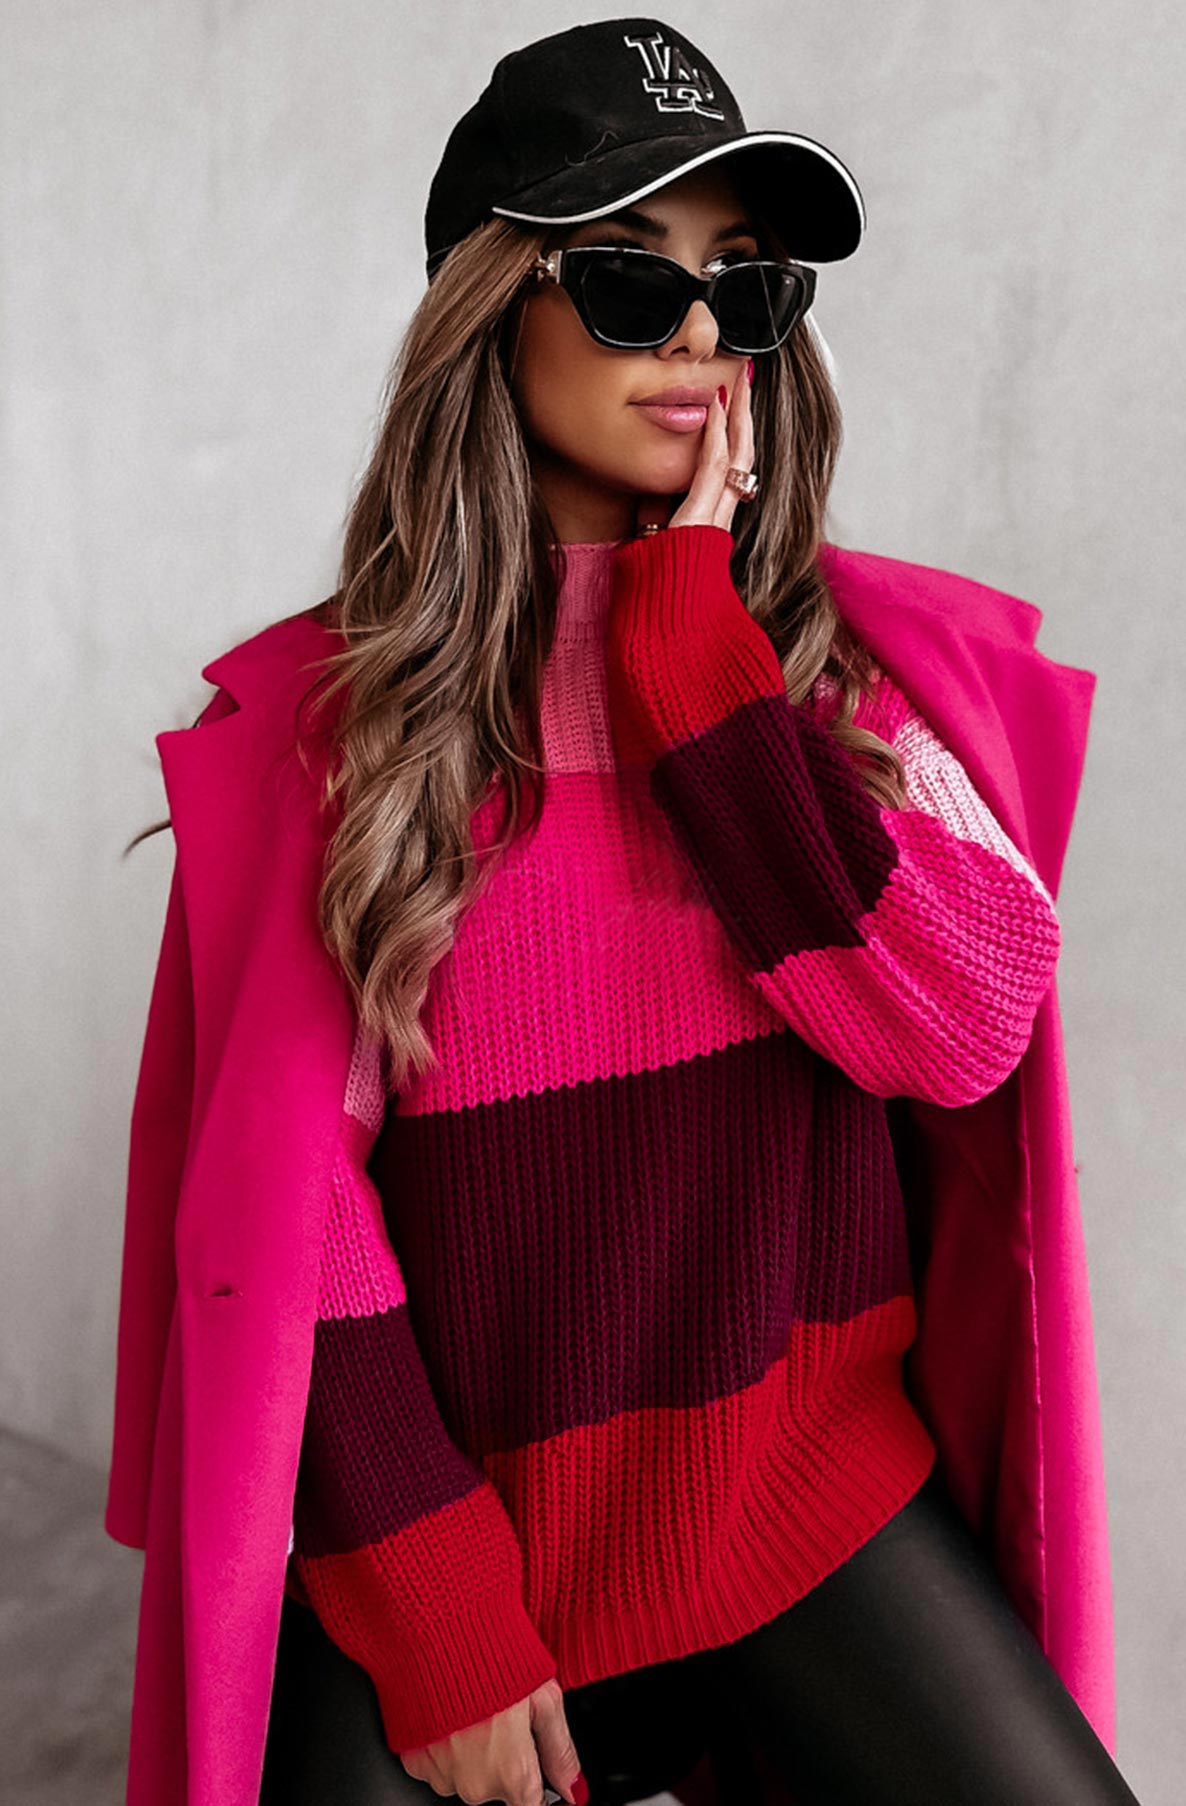 Magenta Colour Block Knitted Jumper Pullover Sweater Top